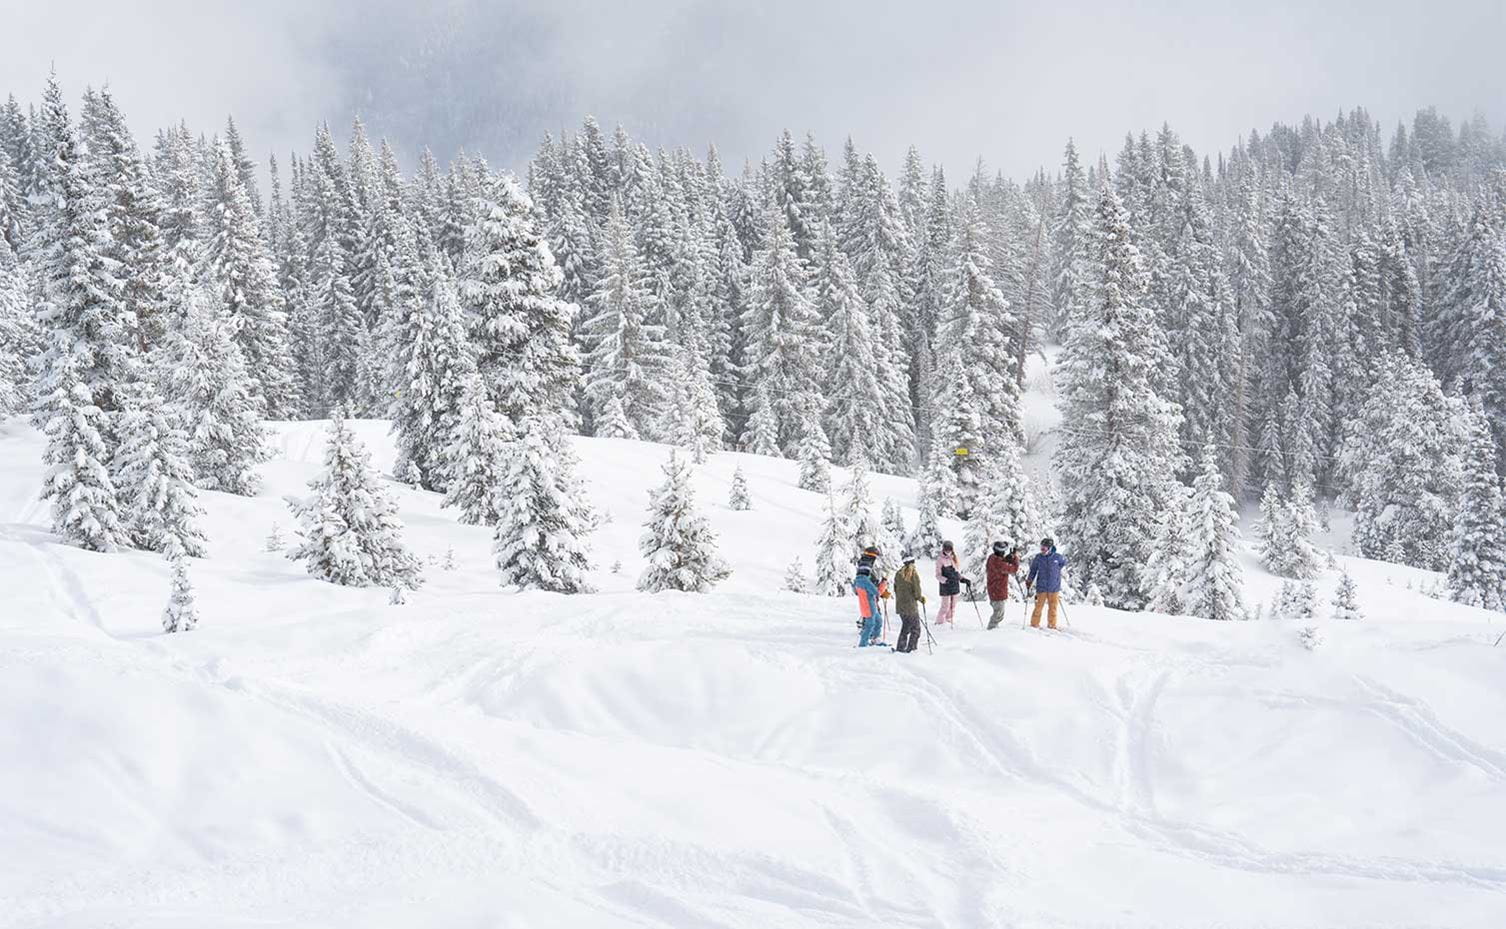 Group of skiers in deep powder at Aspen Snowmass